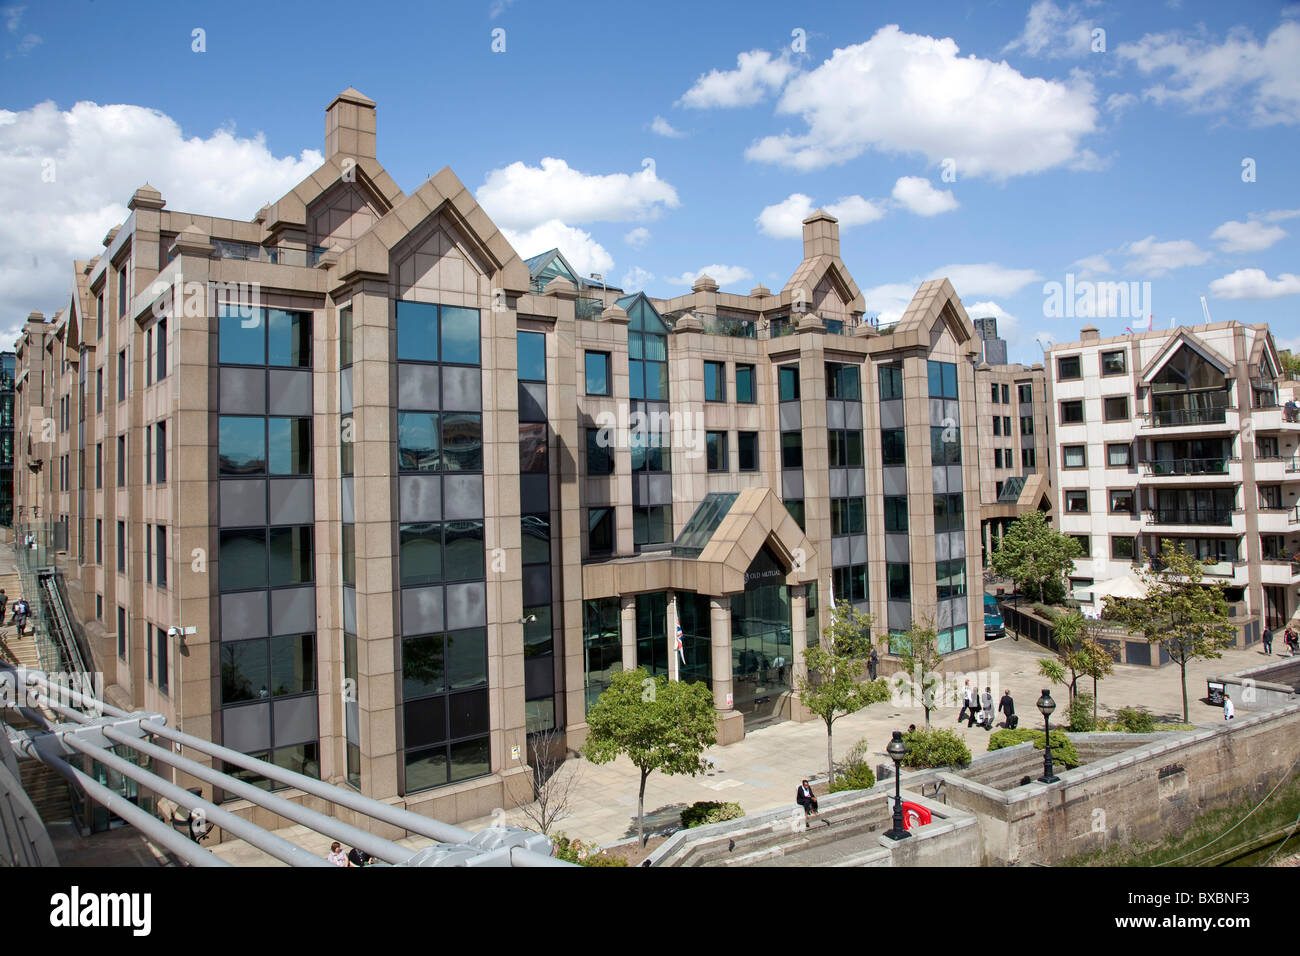 Headquarters of the Old Mutual Insurance in London, England, United Kingdom, Europe Stock Photo